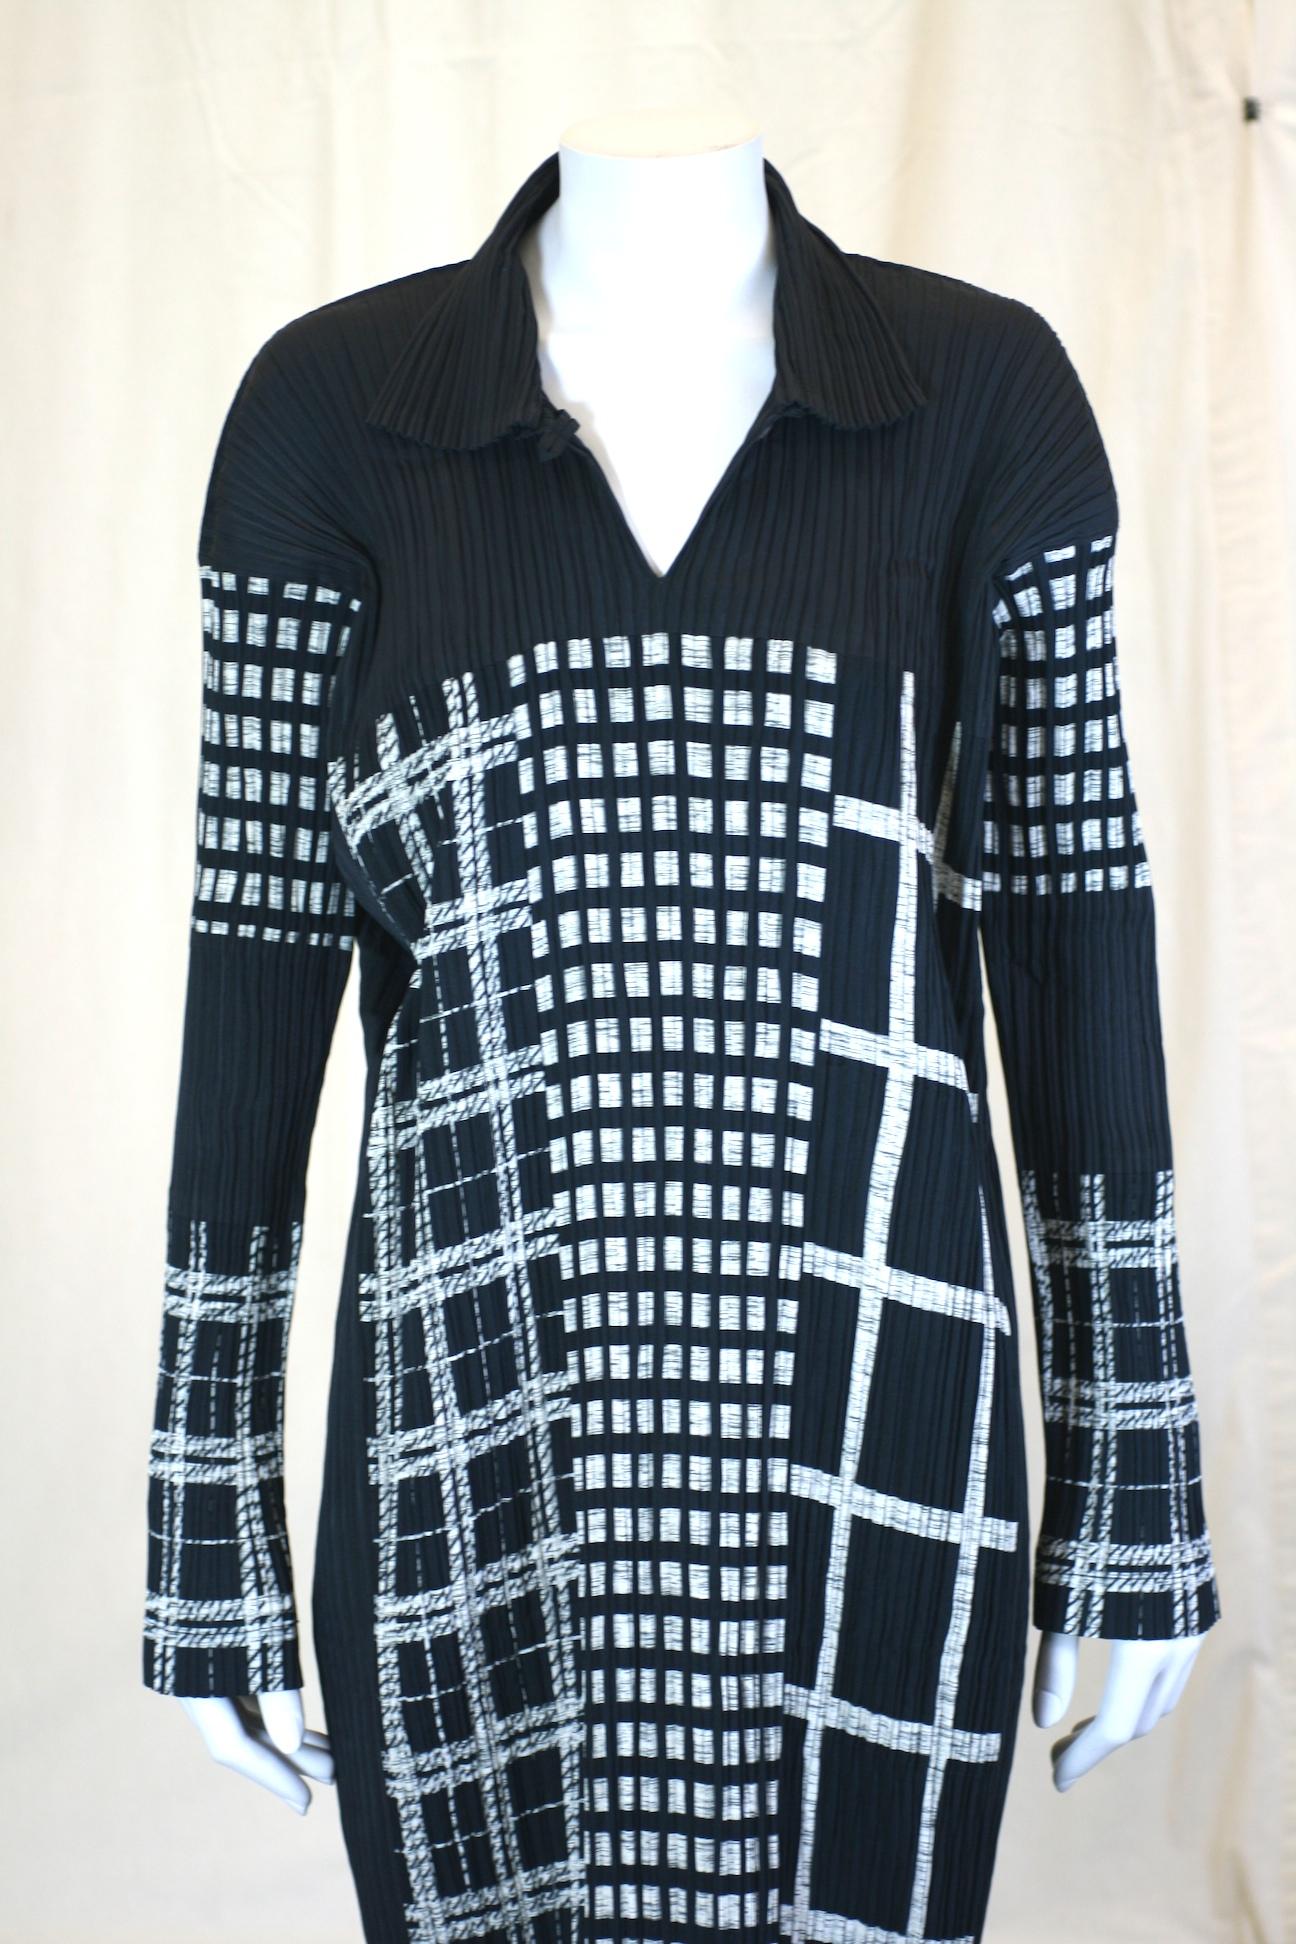 Issey Miyake Graphic Black White Dress in signature pleats. The various patterns look like a night time cityscape. Pullover style with open slash collar with long, lean silhouette.
Size Small. Length 50